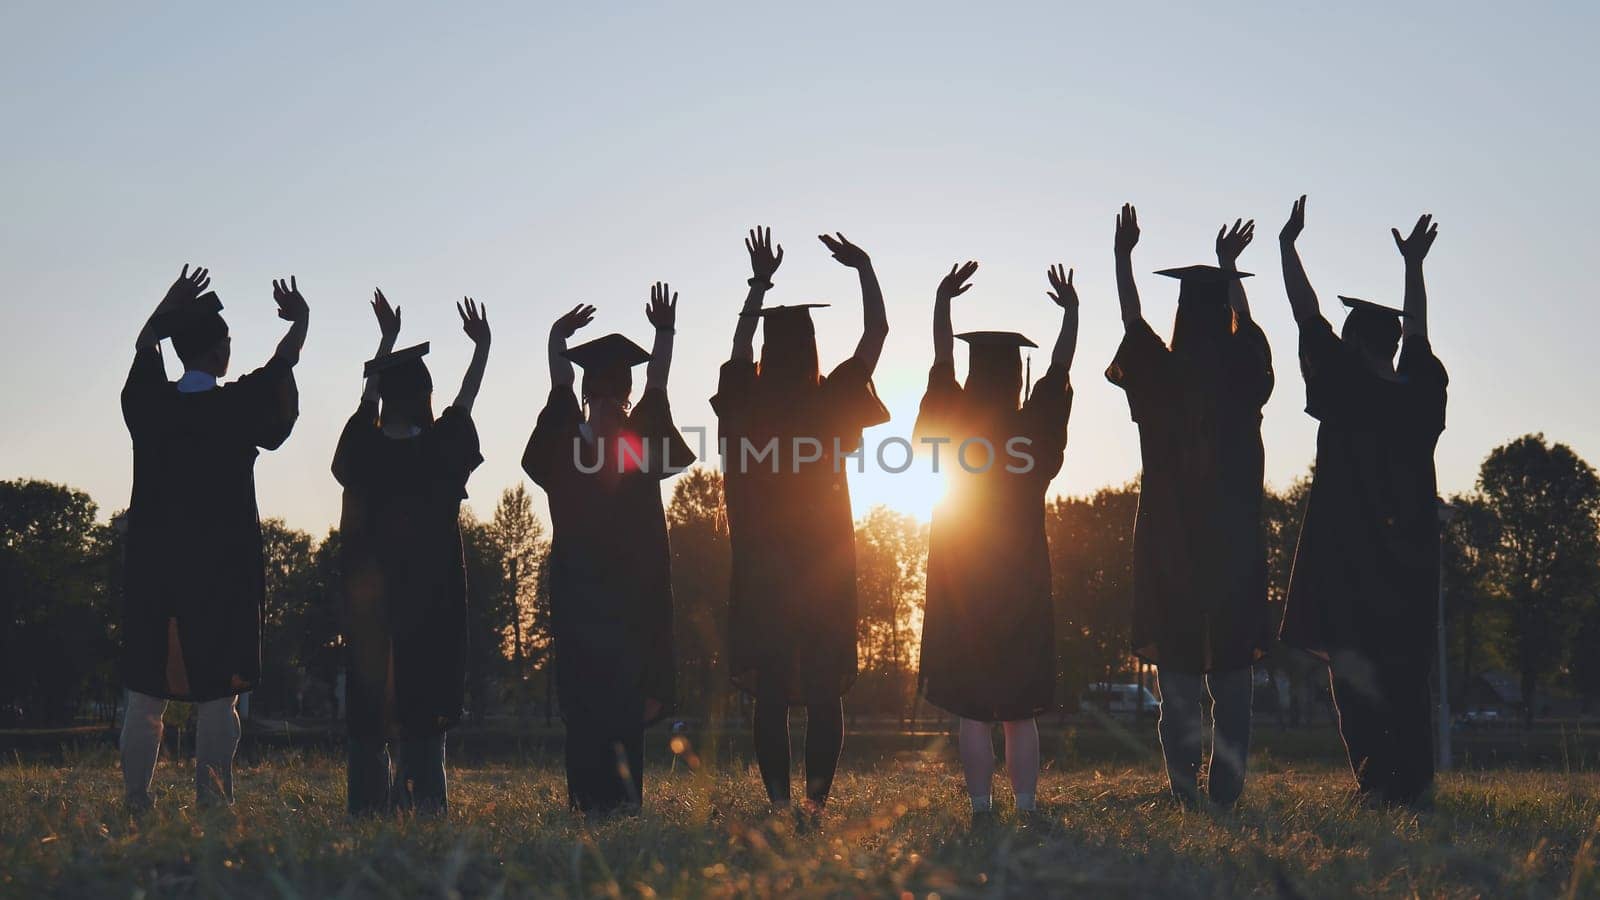 College graduates in robes waving at sunset. by DovidPro